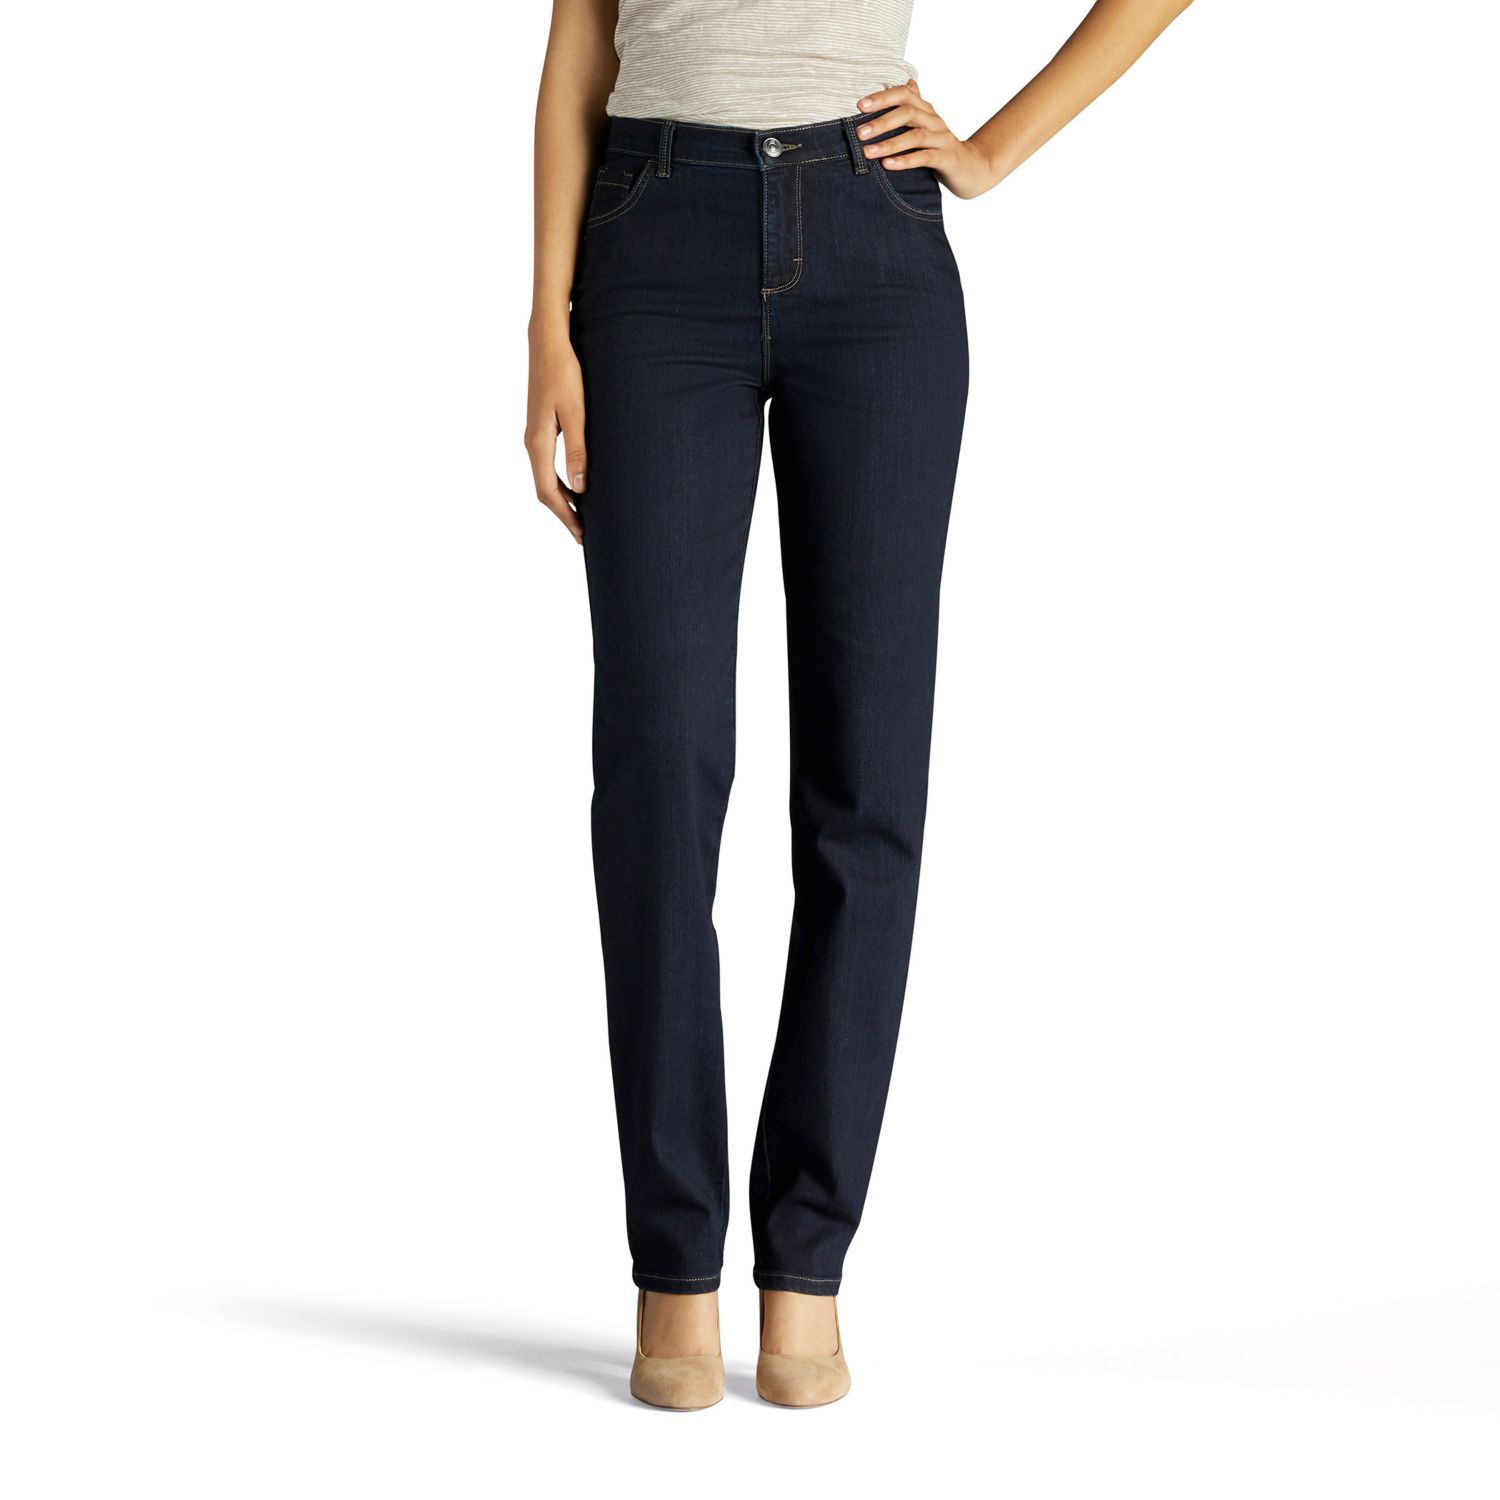 women's lee jeans classic fit at the waist